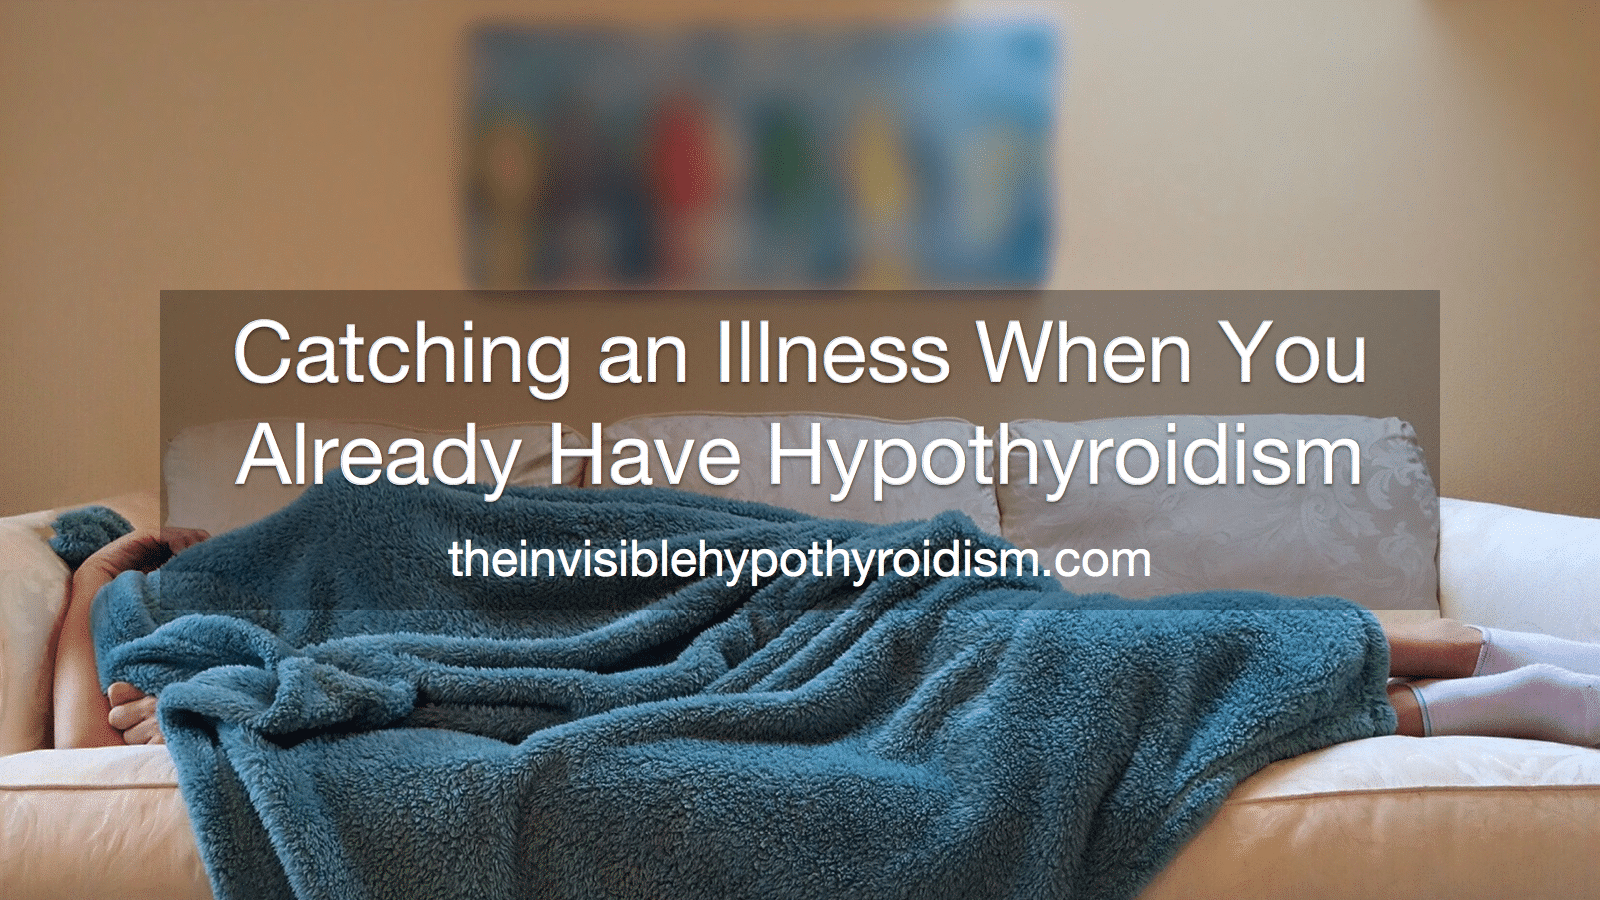 Catching an Illness When You Already Have Hypothyroidism